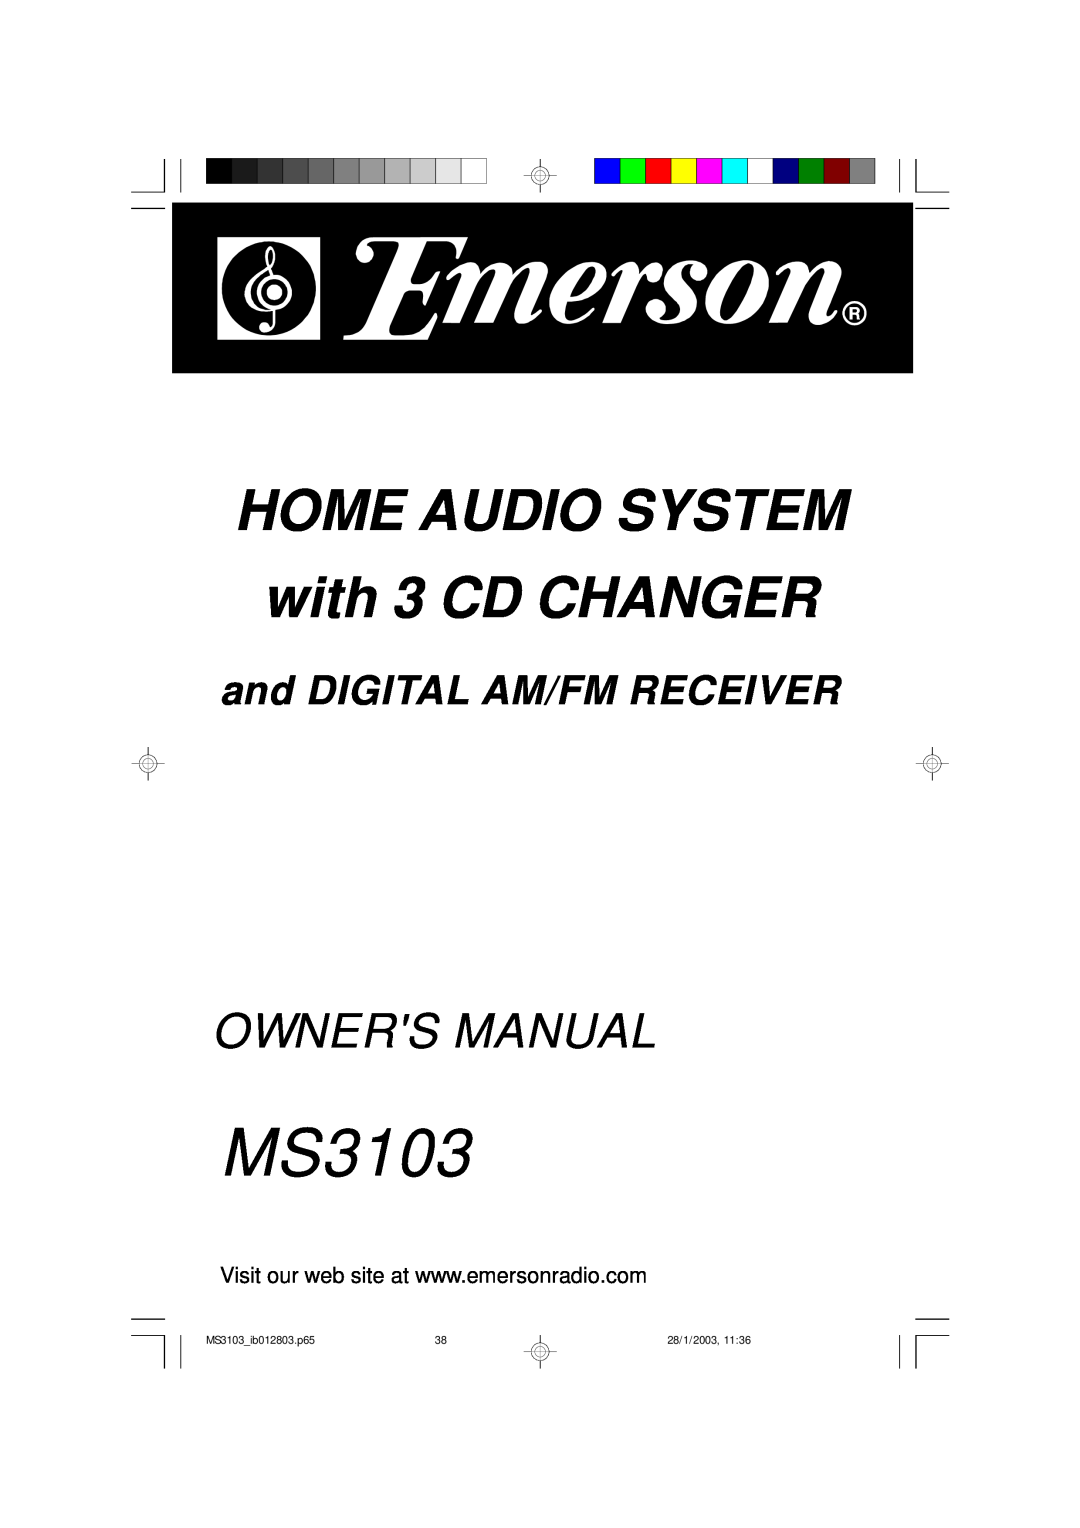 Emerson owner manual HOME AUDIO SYSTEM with 3 CD CHANGER, and DIGITAL AM/FM RECEIVER, MS3103 ib012803.p65, 28/1/2003 